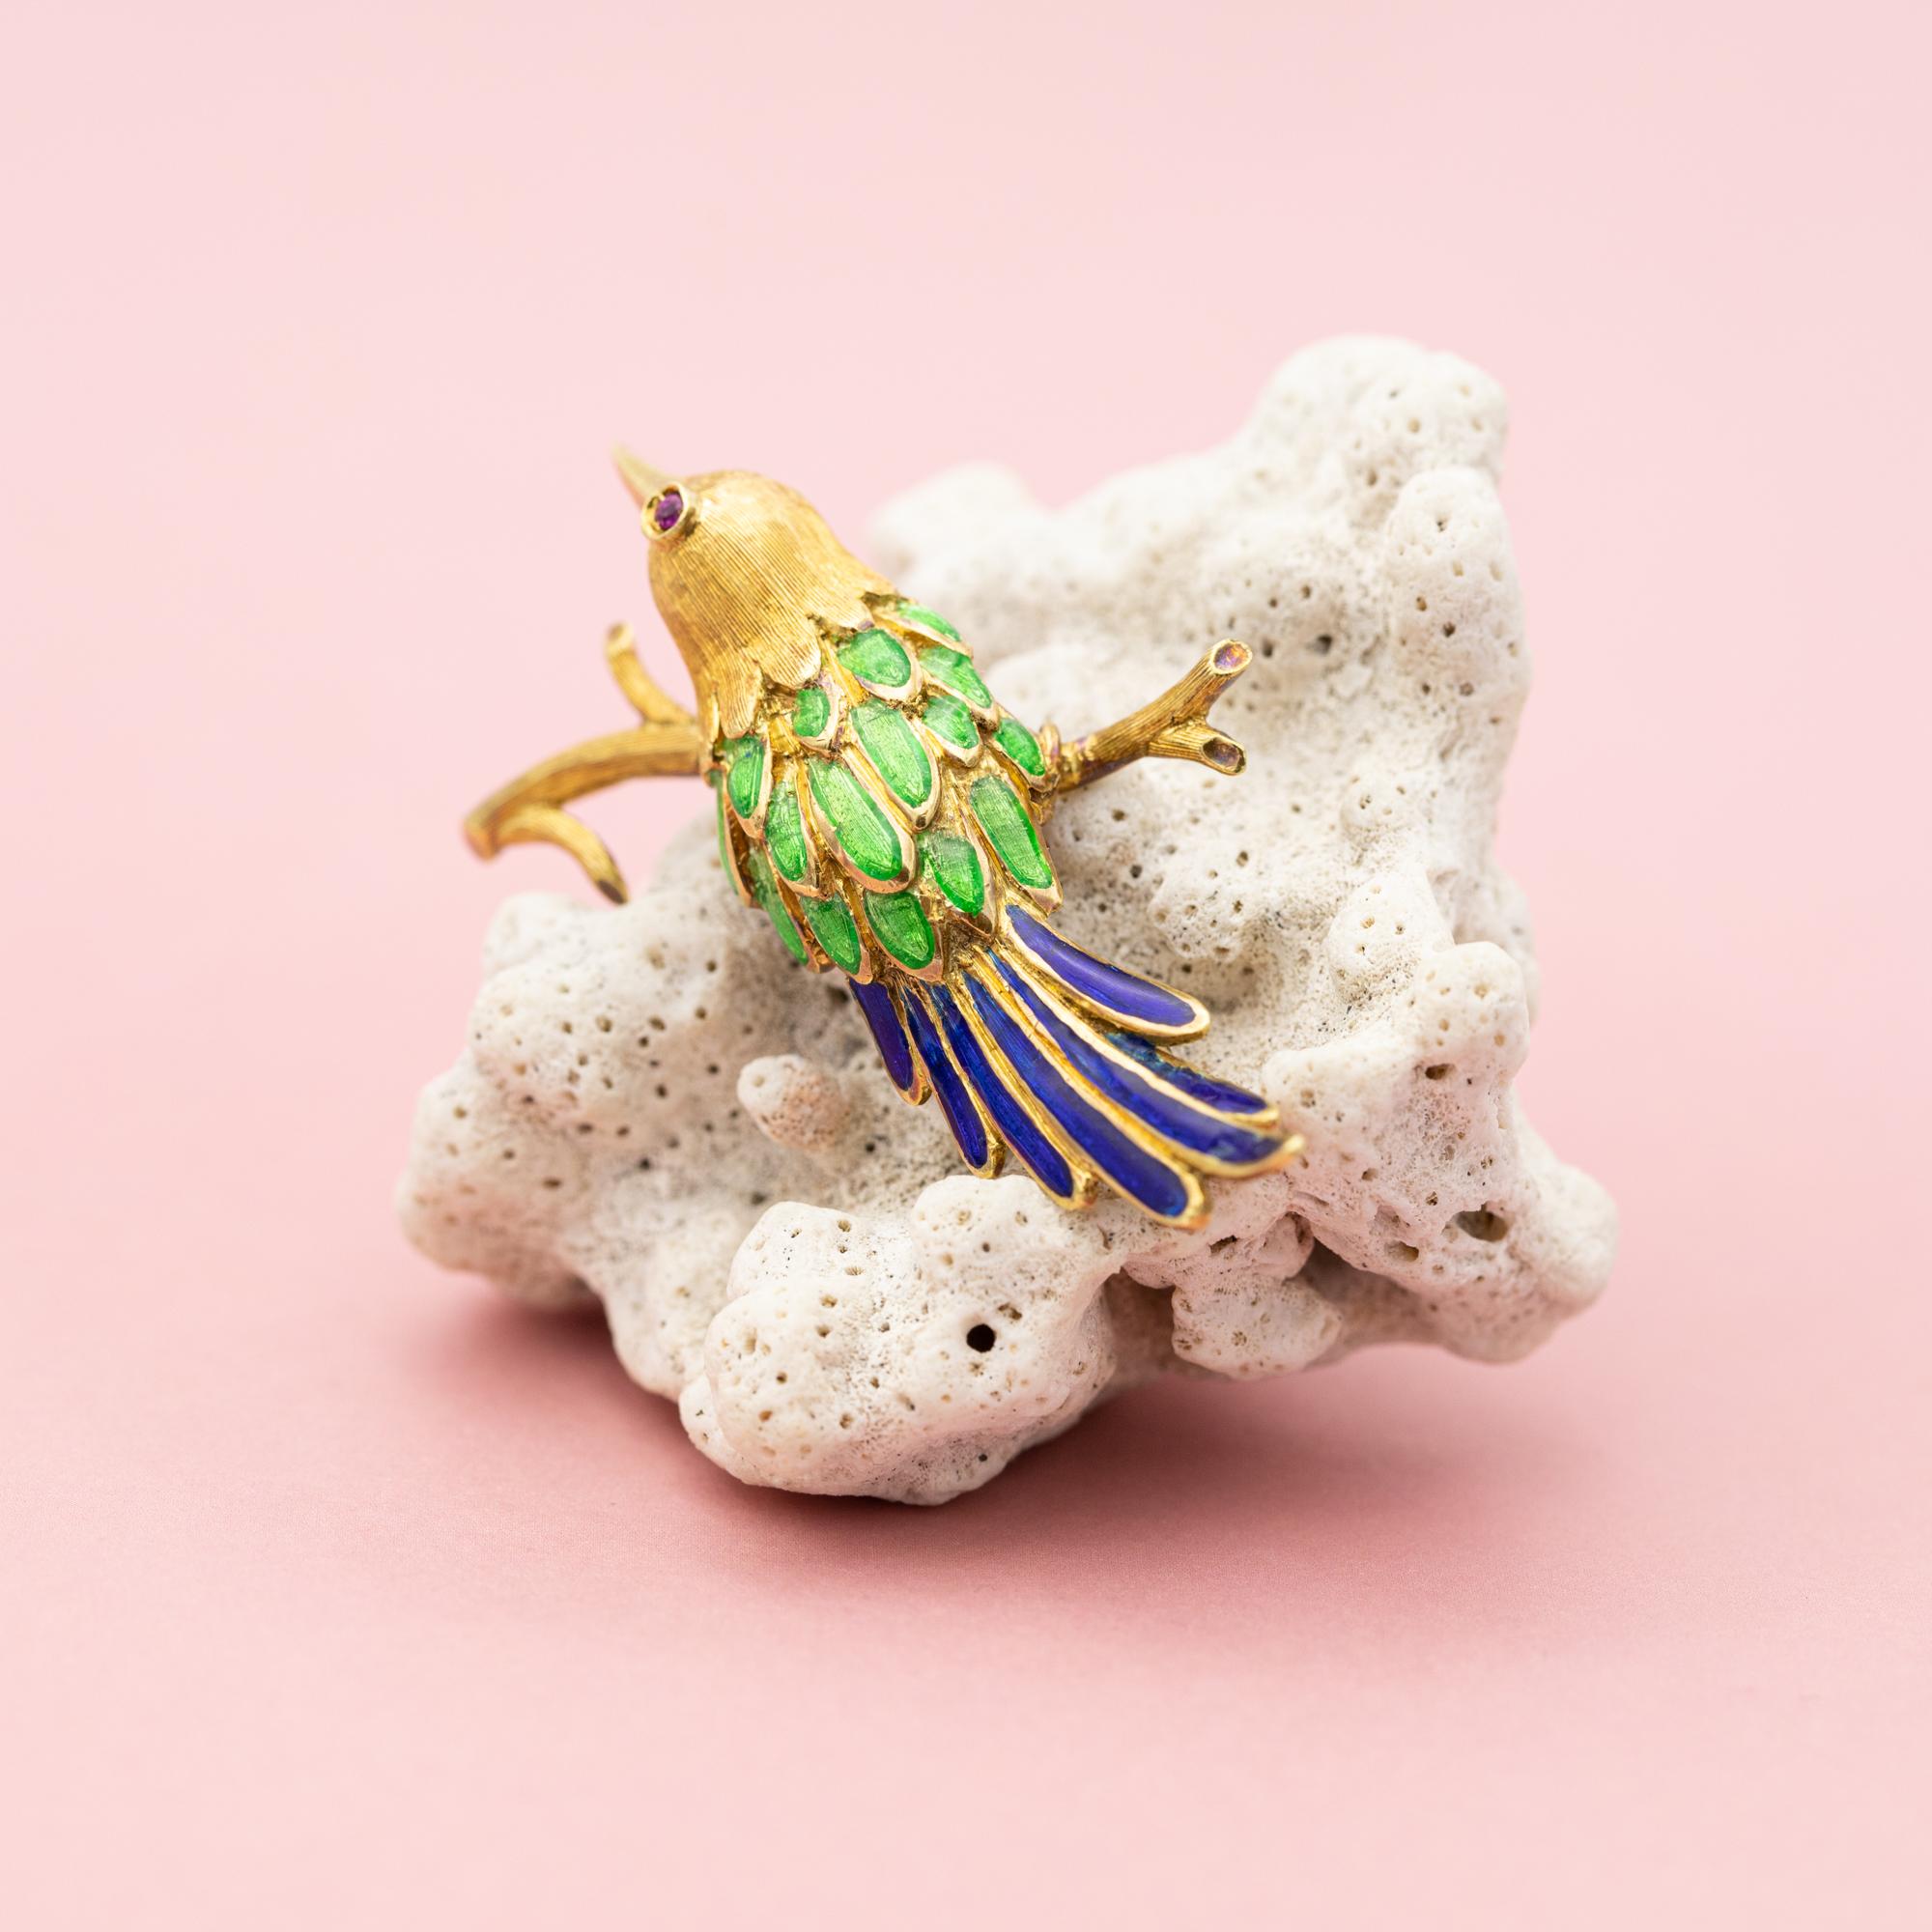 For sale is this very cute colourful bird brooch. This 18k yellow gold animal is set with a lovely small ruby eye and decorated with Blue, Green enamel feathers. Two of the blue enamel feathers are a bit damaged, the top coat of the enamel is a bit